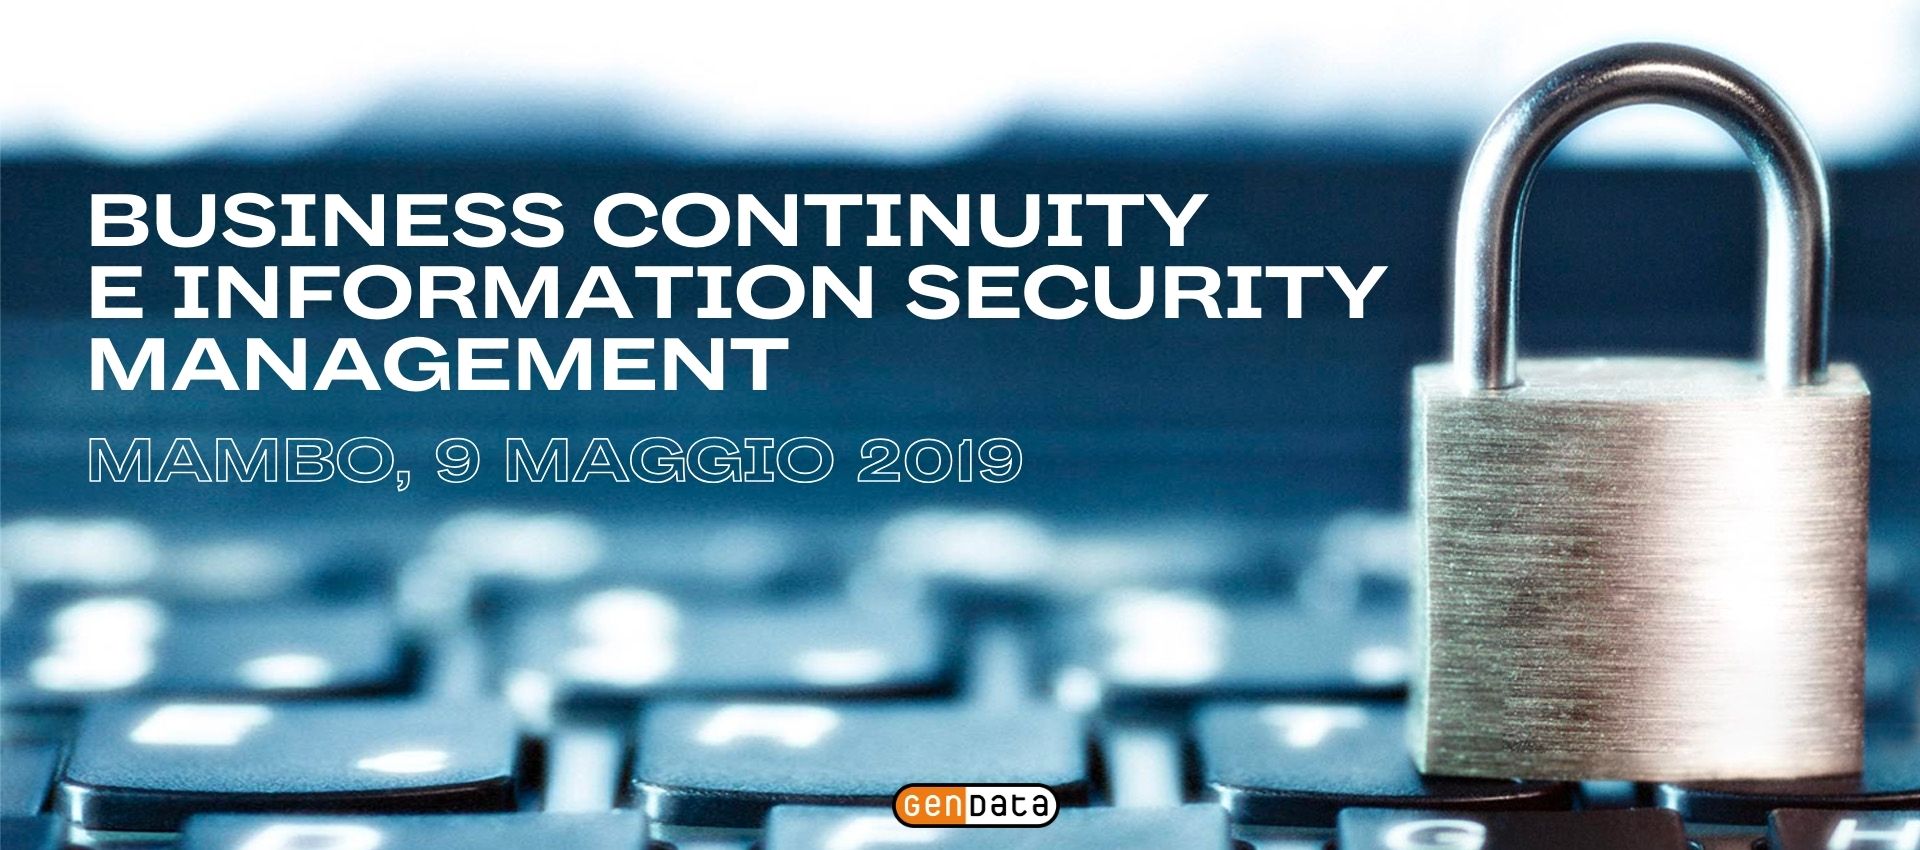 Business Continuity e Information Security Management, MAMbo 9 maggio 2019